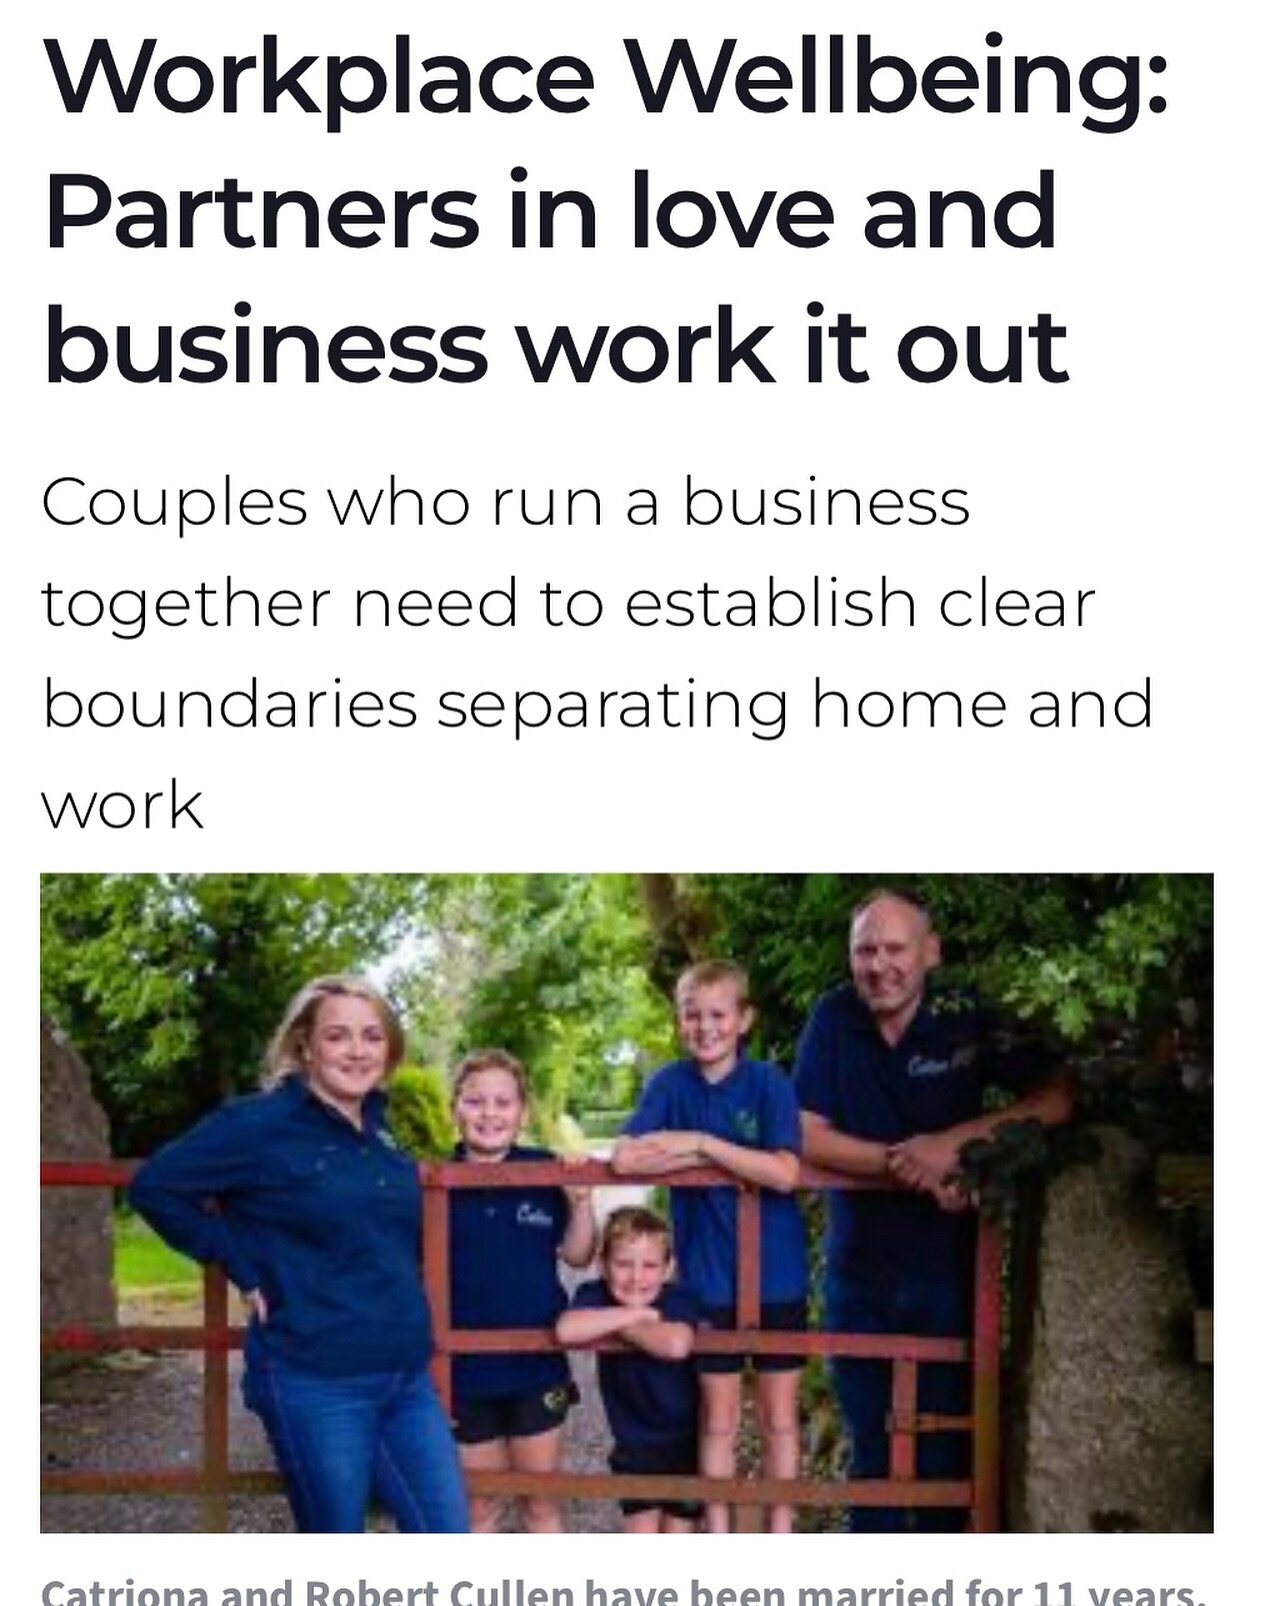 Thrilled to have been interviewed and featured in @sharondingle most recent article for @irish_examiner Examiner titled &ldquo;Workplace Wellbeing: Partners in love and business work it out&rdquo;.

In my opinion, relationships (of any kind) can succ